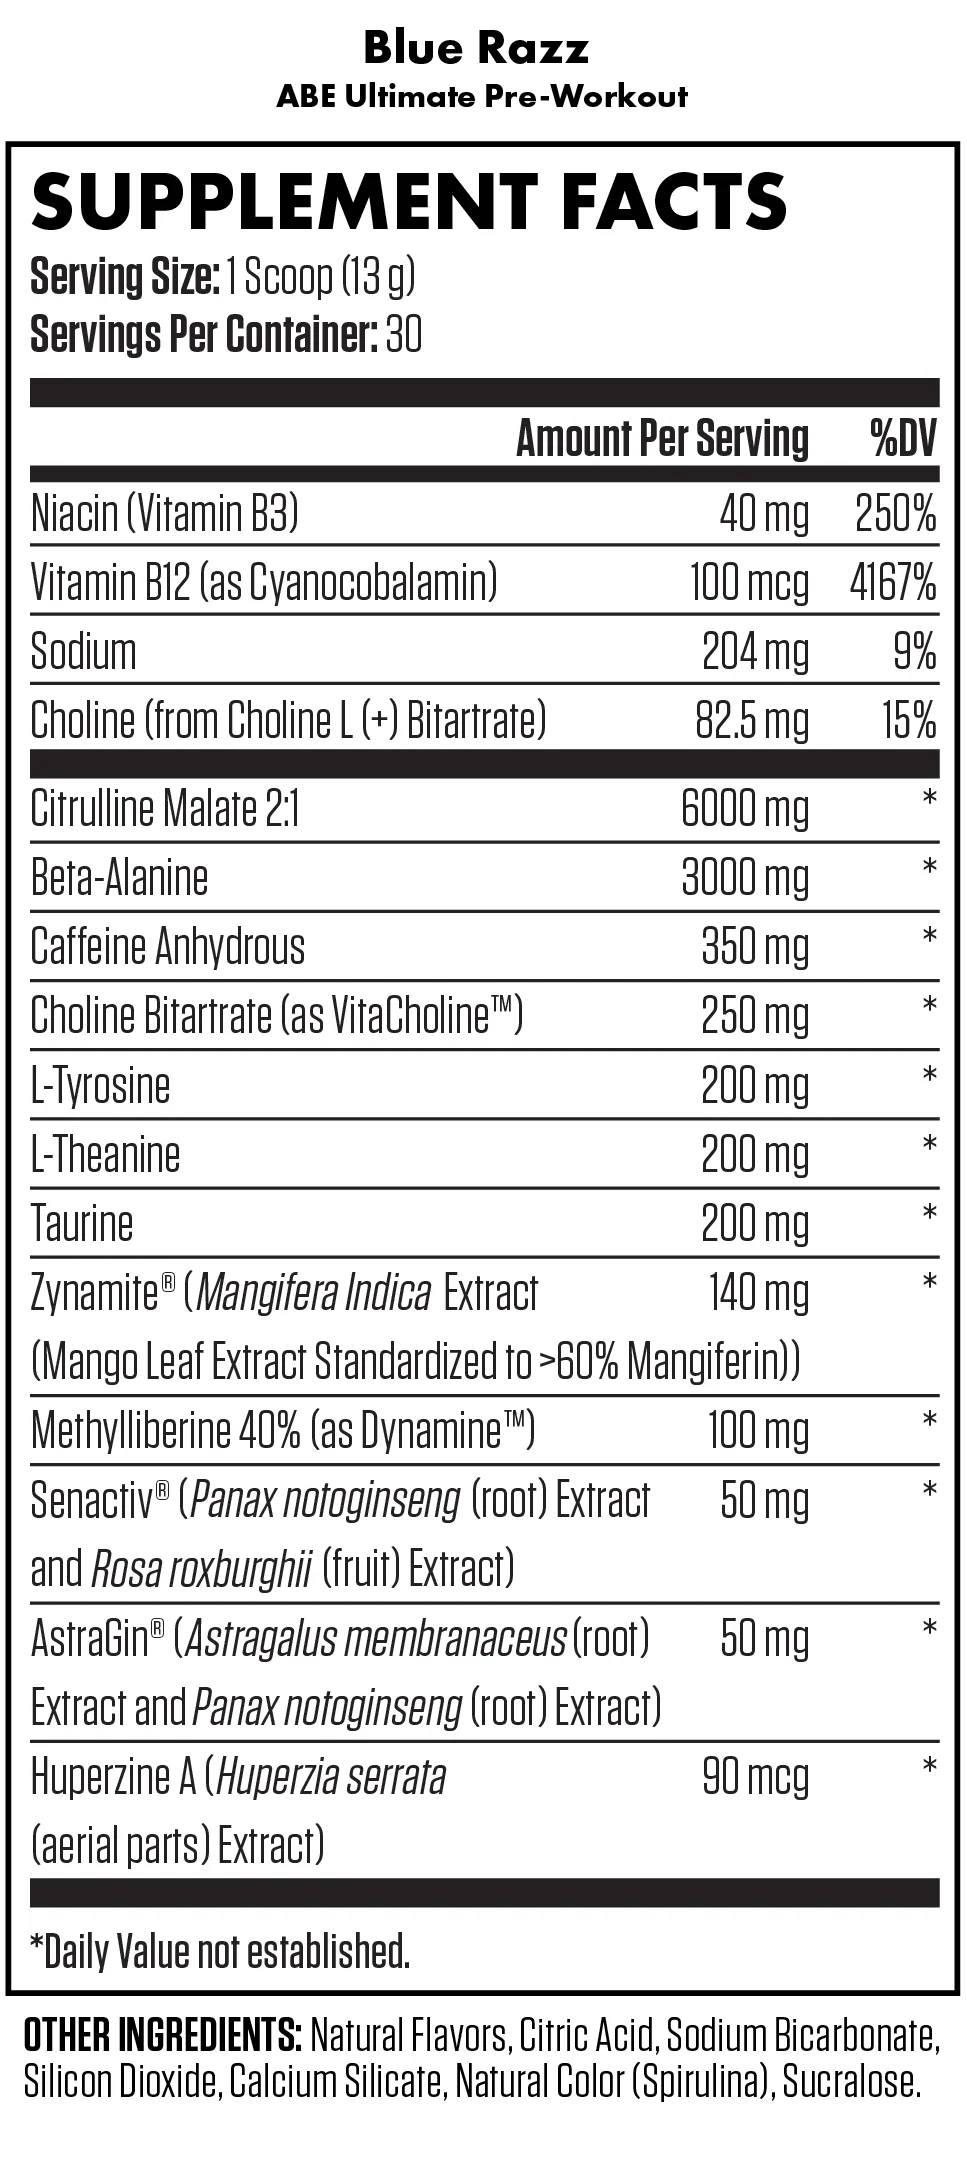 ABE Ultimate Pre-Workout Label Ingredients